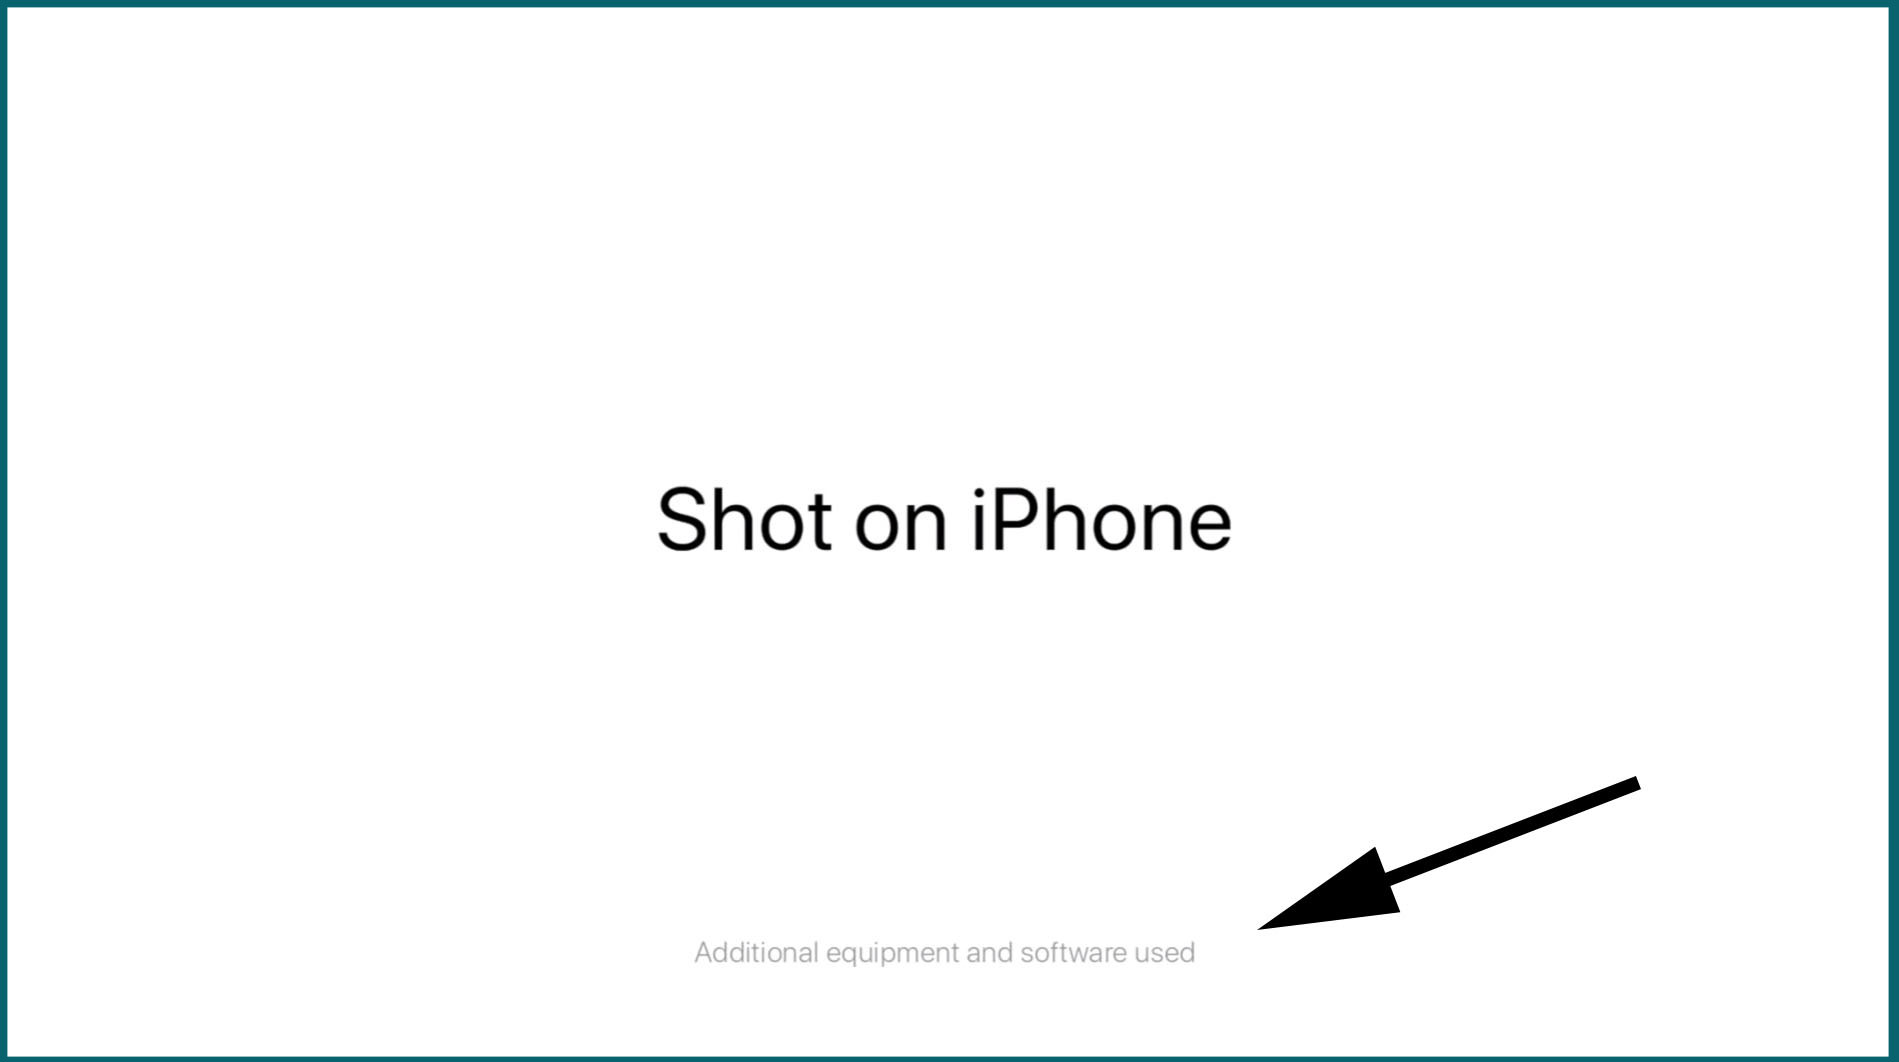 If you remember those TV commercials about using iPhones to shoot movies, you should check out the fine print.